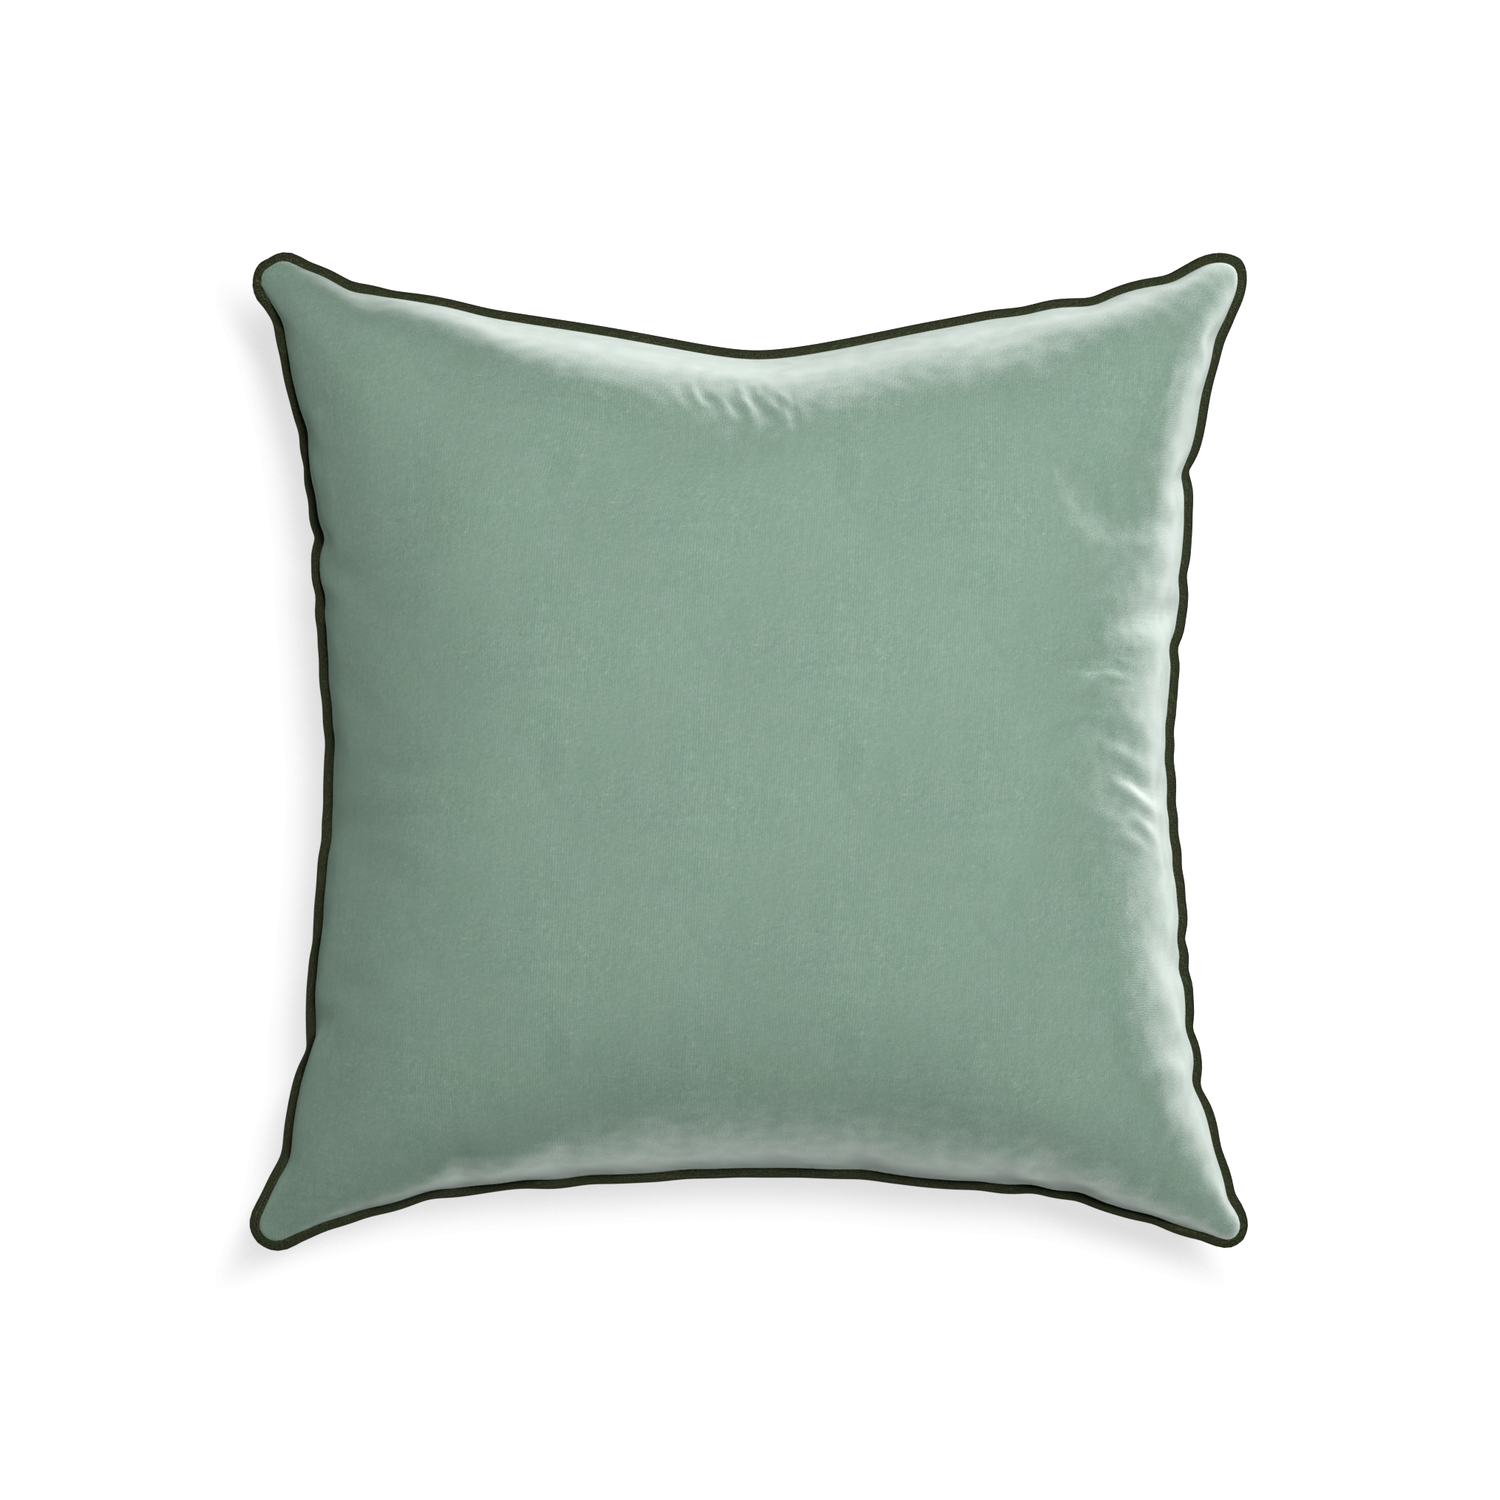 square blue green velvet pillow with fern green piping